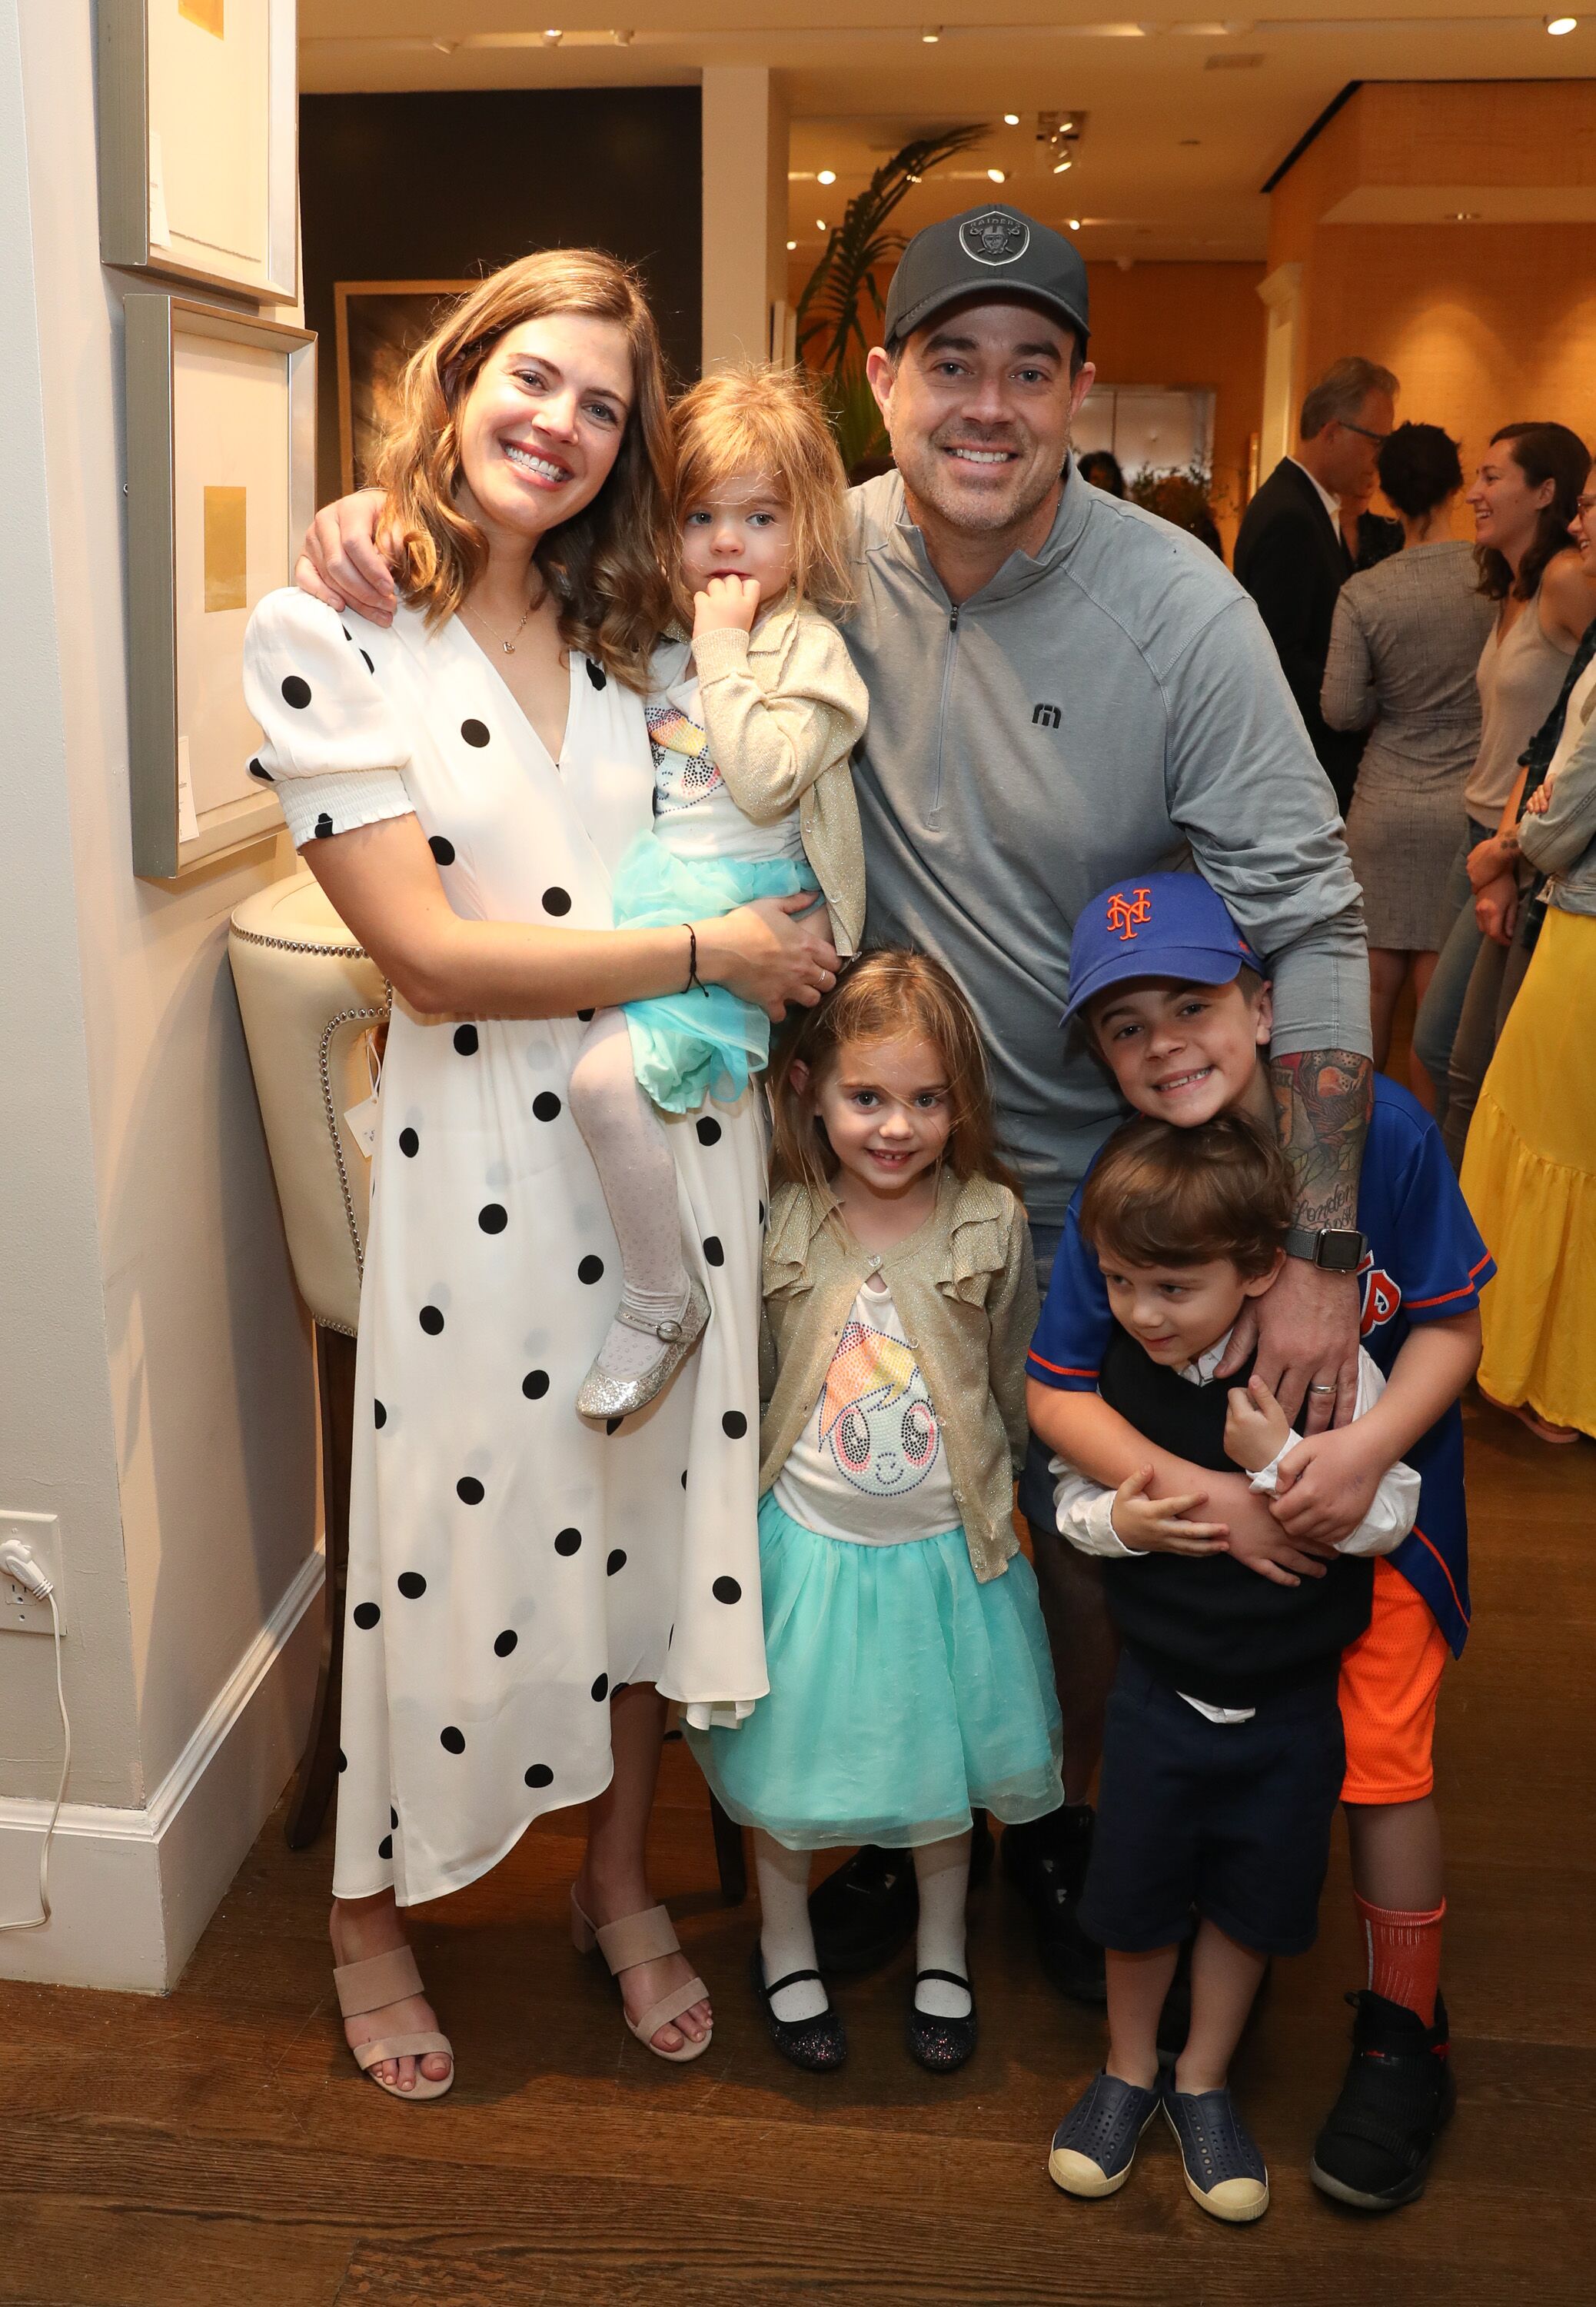 Siri Daly and Carson Daly, and family, attend "Siriously Delicious" by Siri Daly book launch event at Williams Sonoma Columbus Circle on April 14, 2018 in New York City. | Source: Getty Images